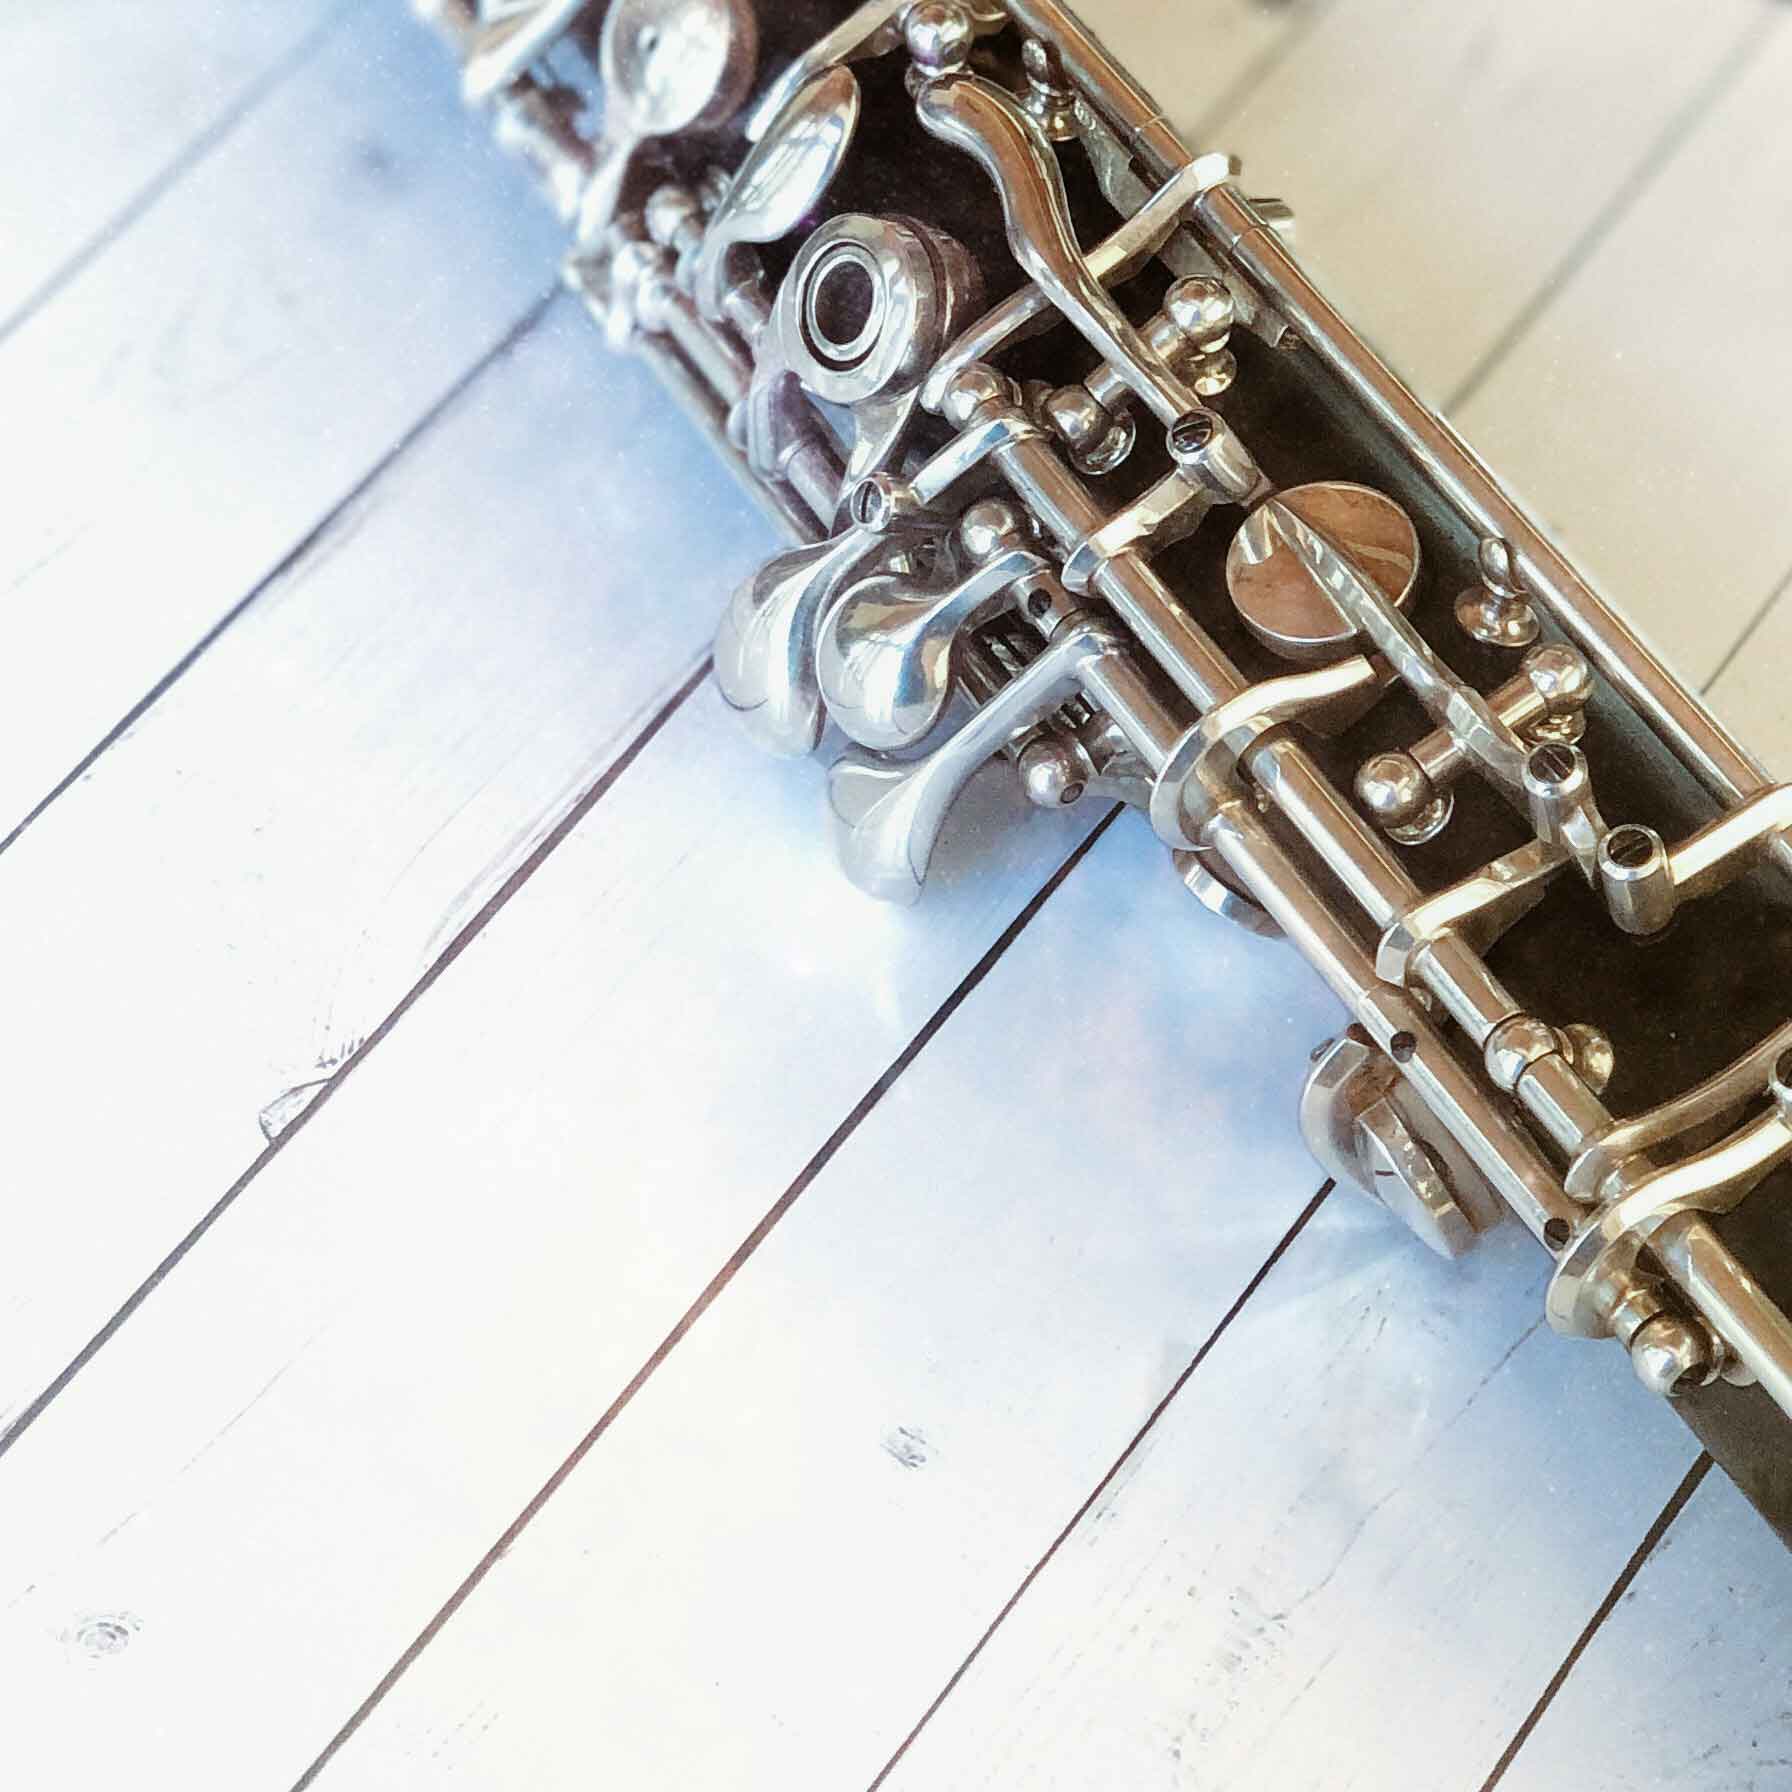 Understanding The Oboe: A must see!